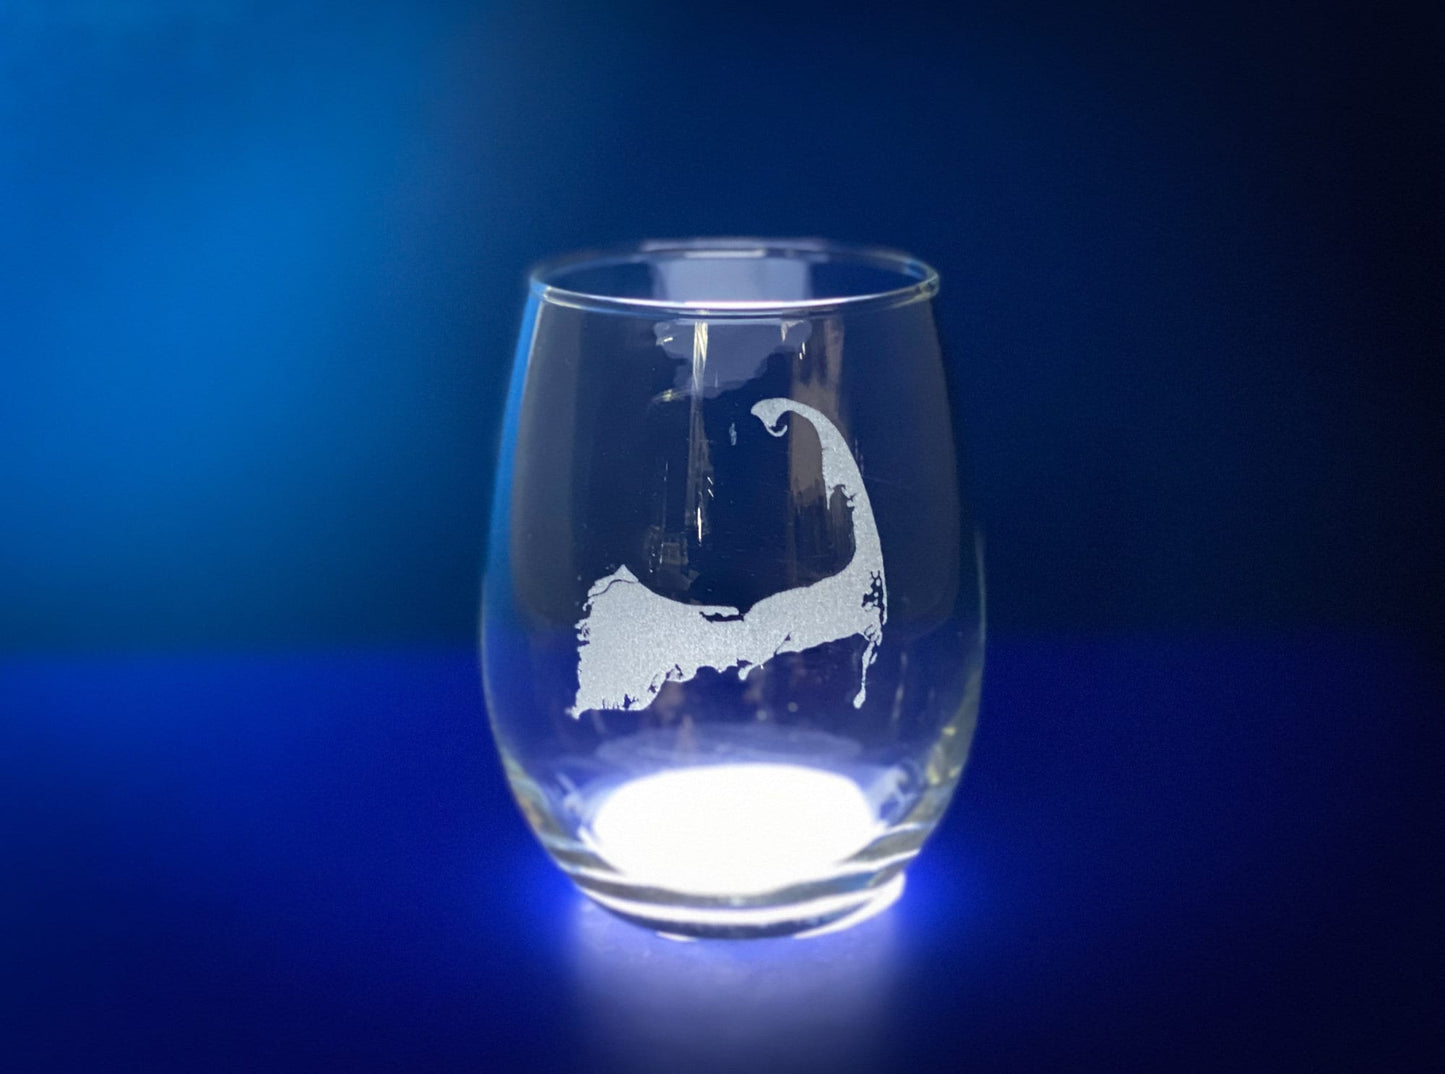 Cape Cod - Etched 15 oz Stemless Wine Glass